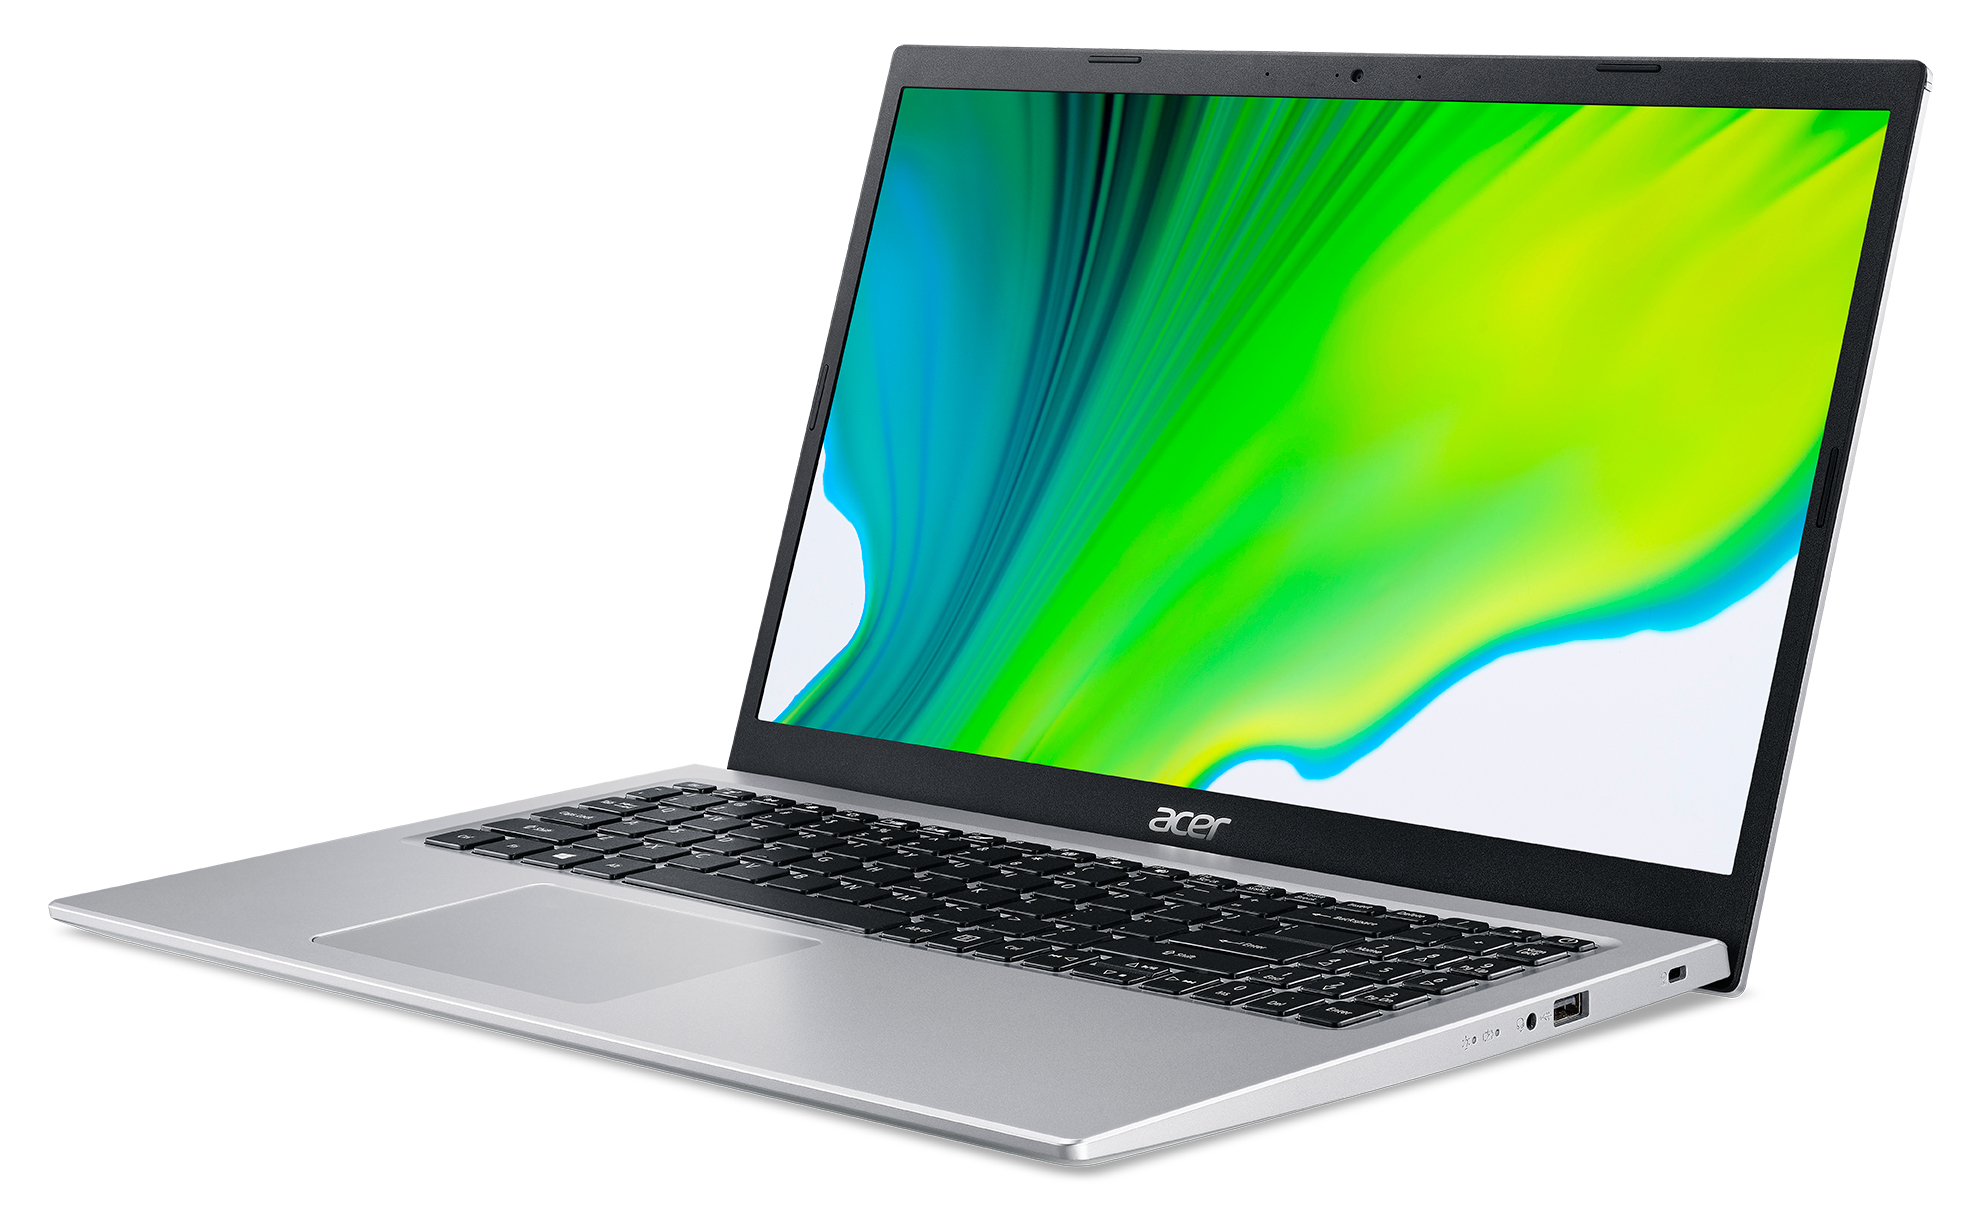 GB 15,6 5 Notebook Xe i5 Core™ Silber Intel 8 Graphics, mit Display, SSD, Iris RAM, 512 GB ACER Prozessor, Aspire (A515-56-560W), Zoll Acer Intel®